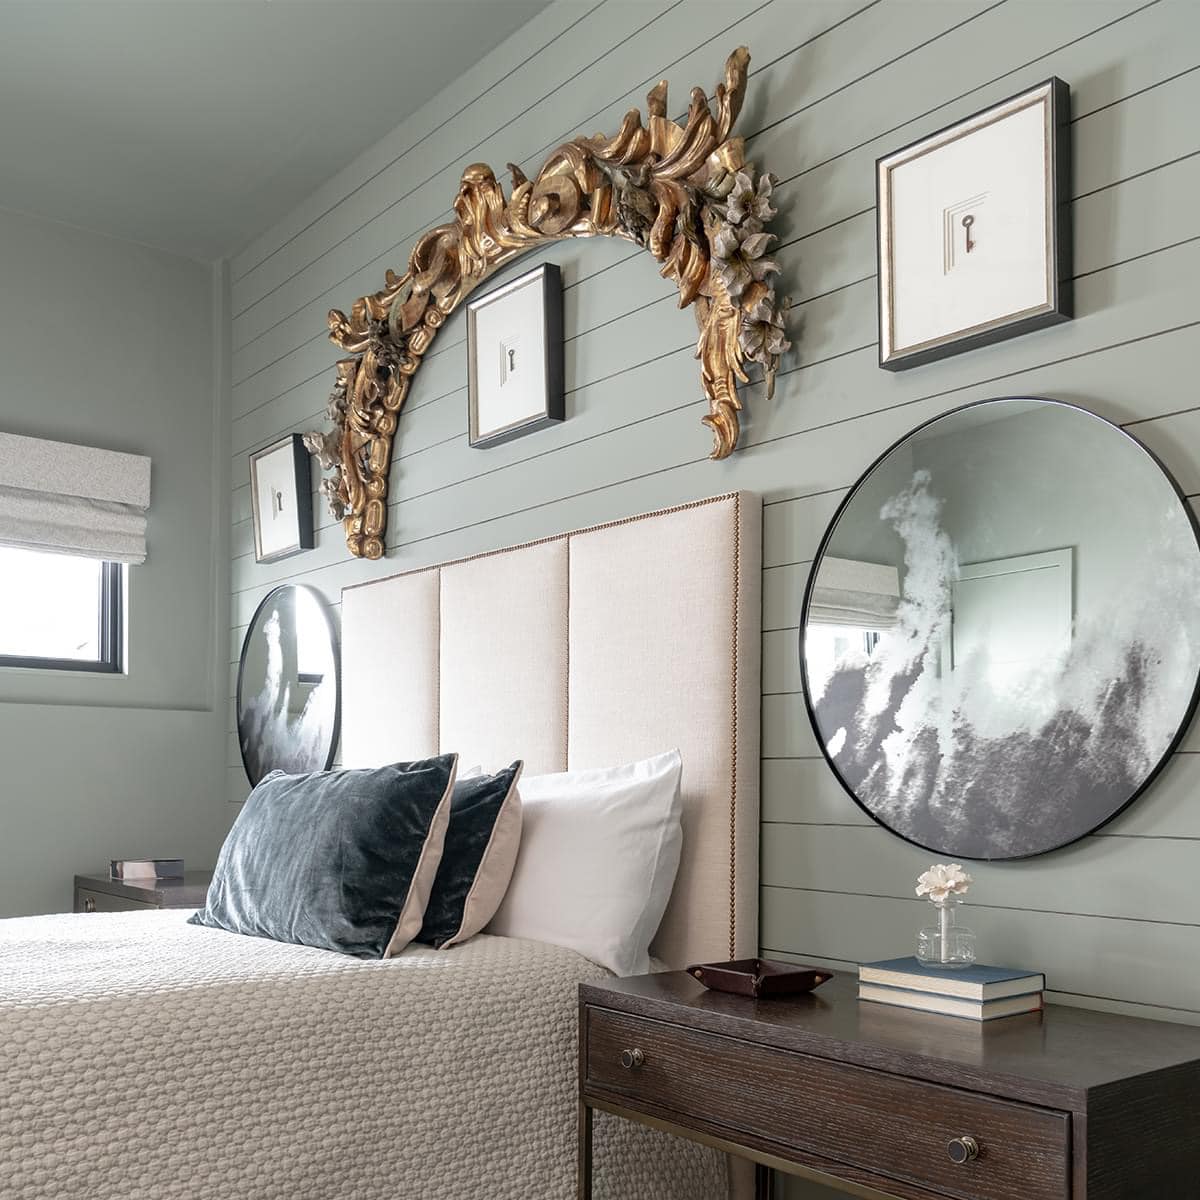 Evergreen Fog SW 9130 - Sherwin Williams Bedroom Paint Colour